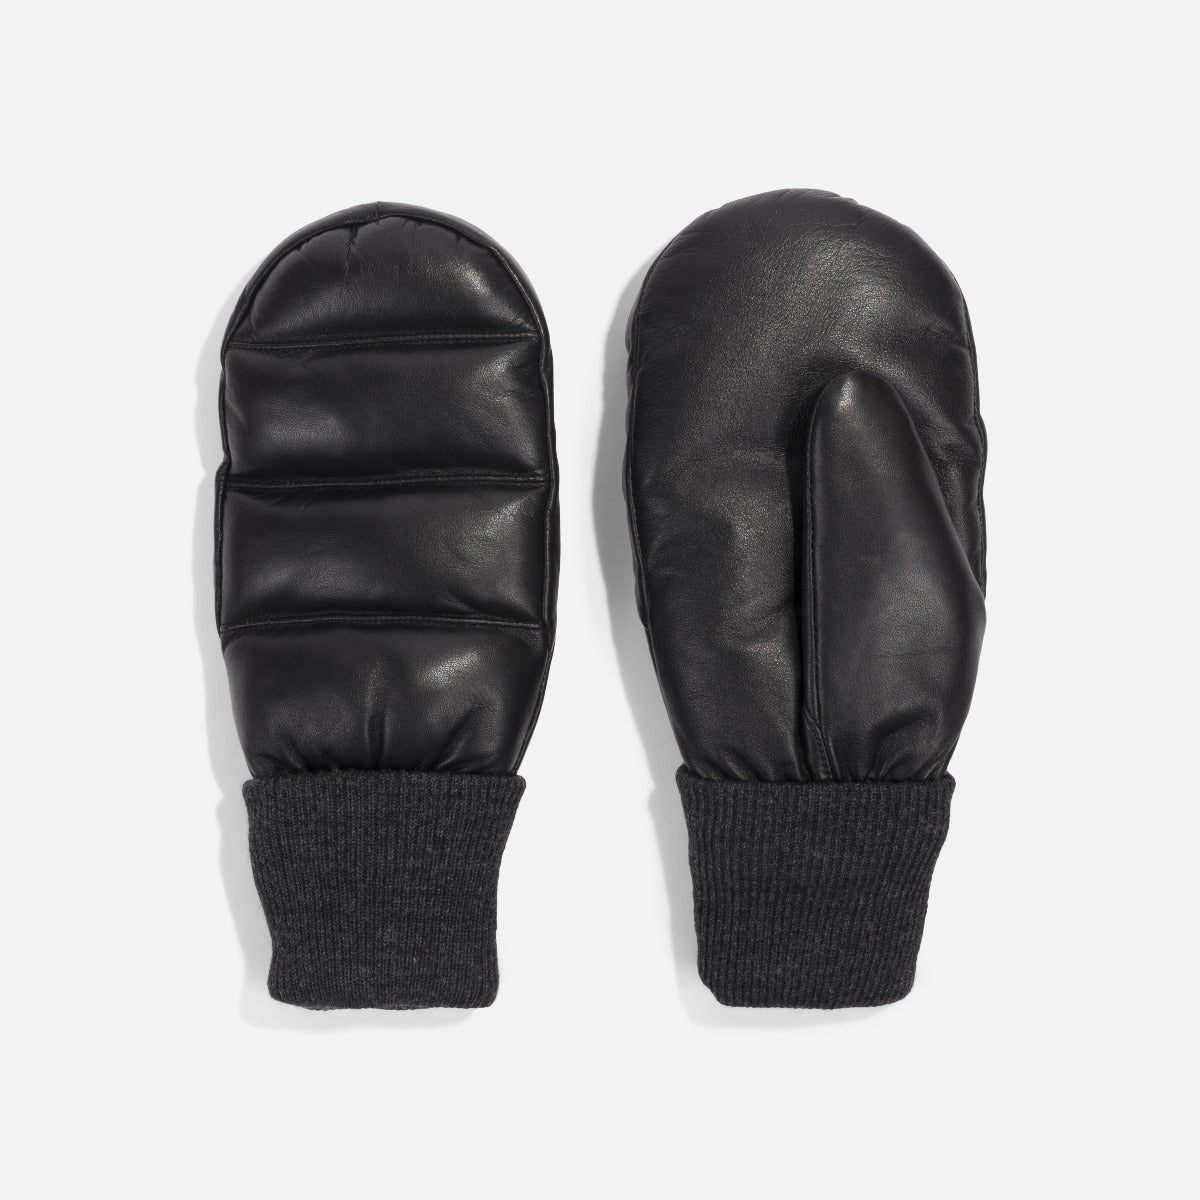 Classic black leather mittens with quilted effect